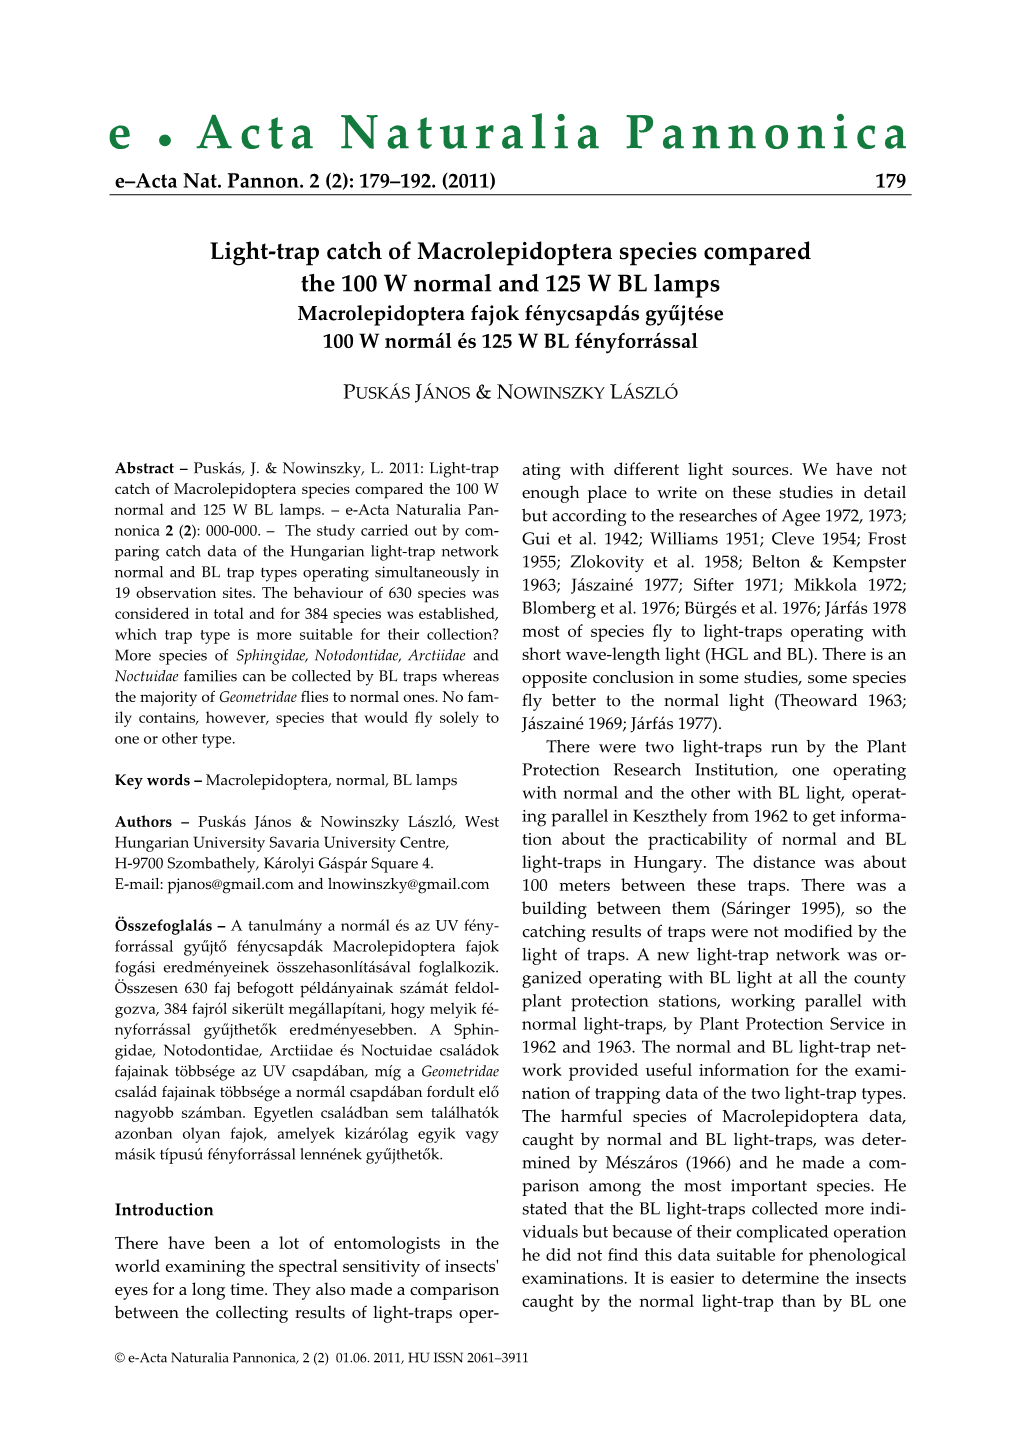 Light-Trap Catch of Macrolepidoptera Species Compared the 100 W